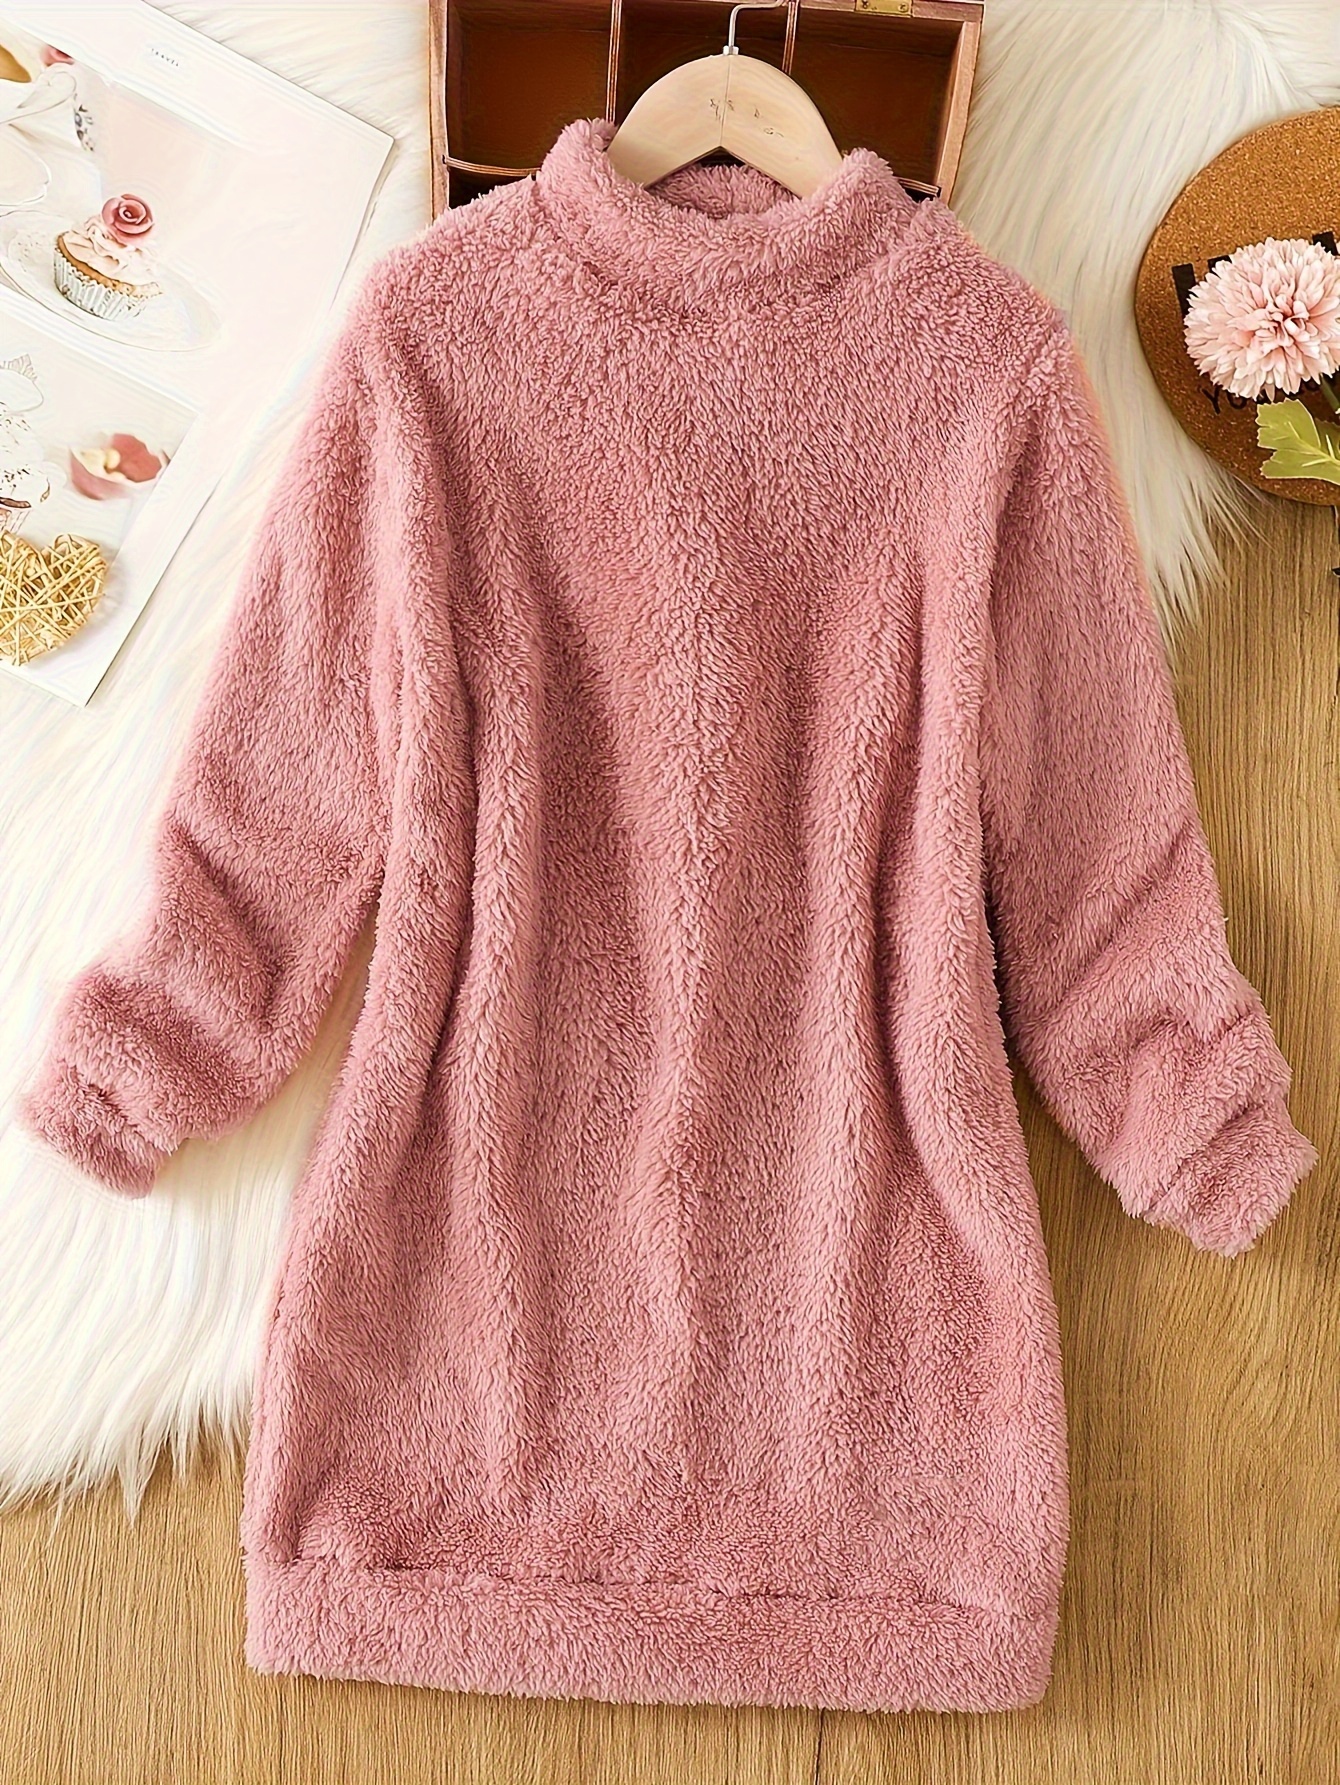 solid fuzzy mock neck dress, solid fuzzy mock neck dress casual long sleeve dress for fall winter womens clothing details 1